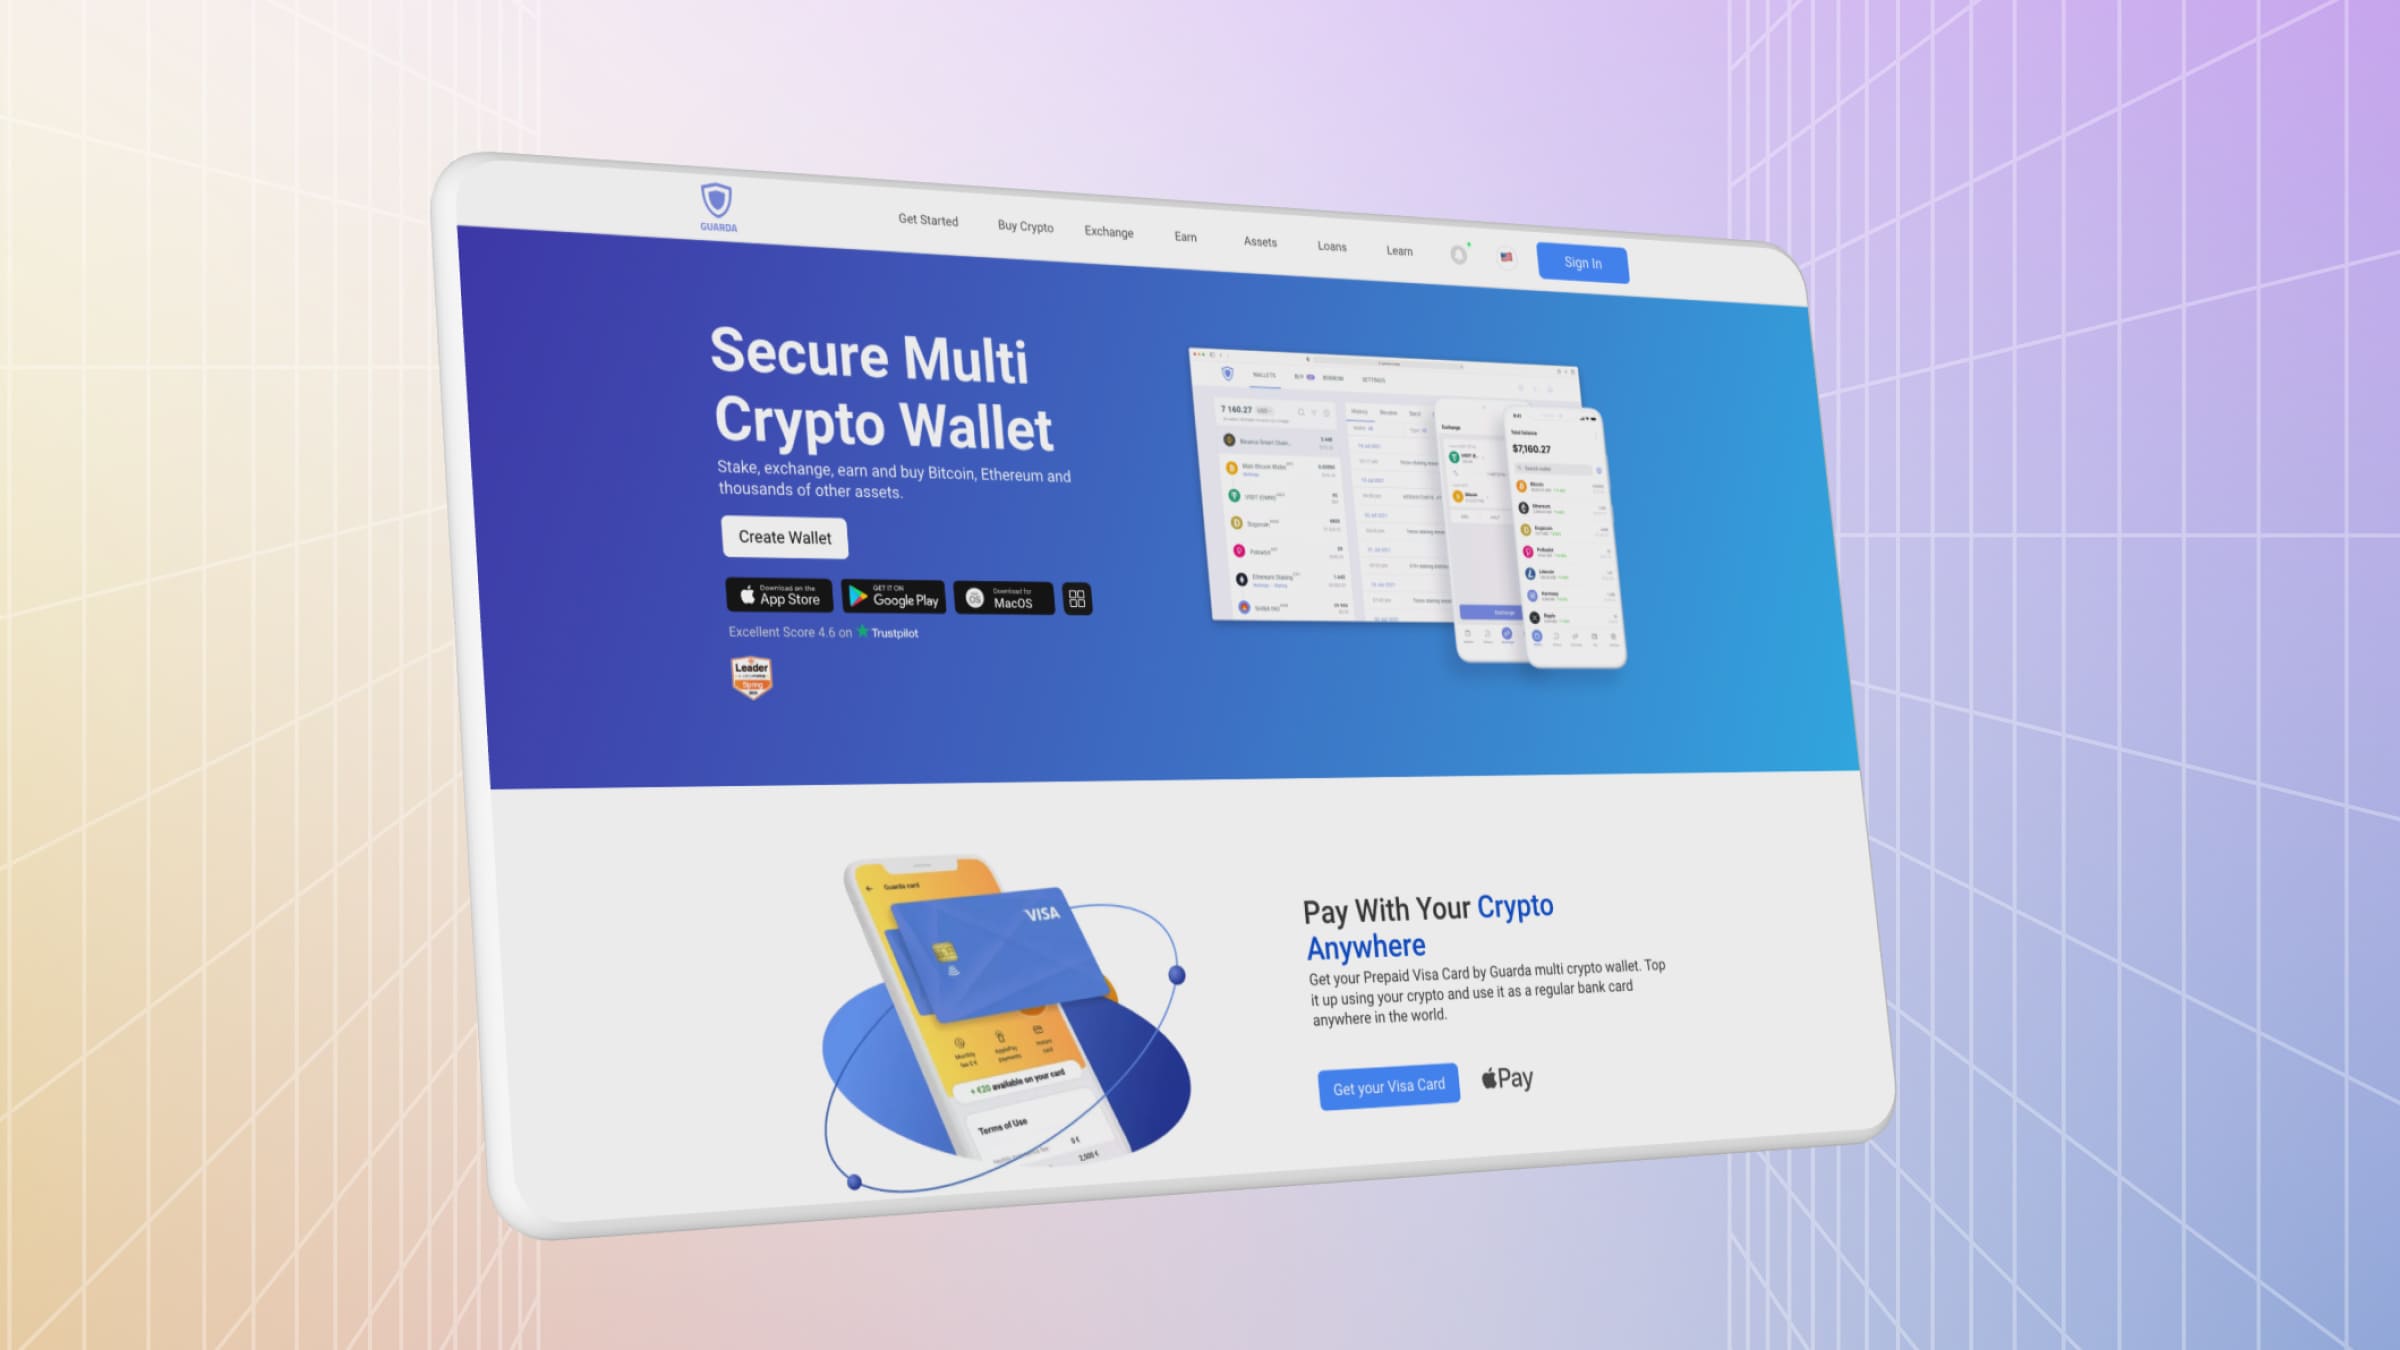 Guarda desktop cryptocurrency wallet supports 400 thousand cryptocurrencies.